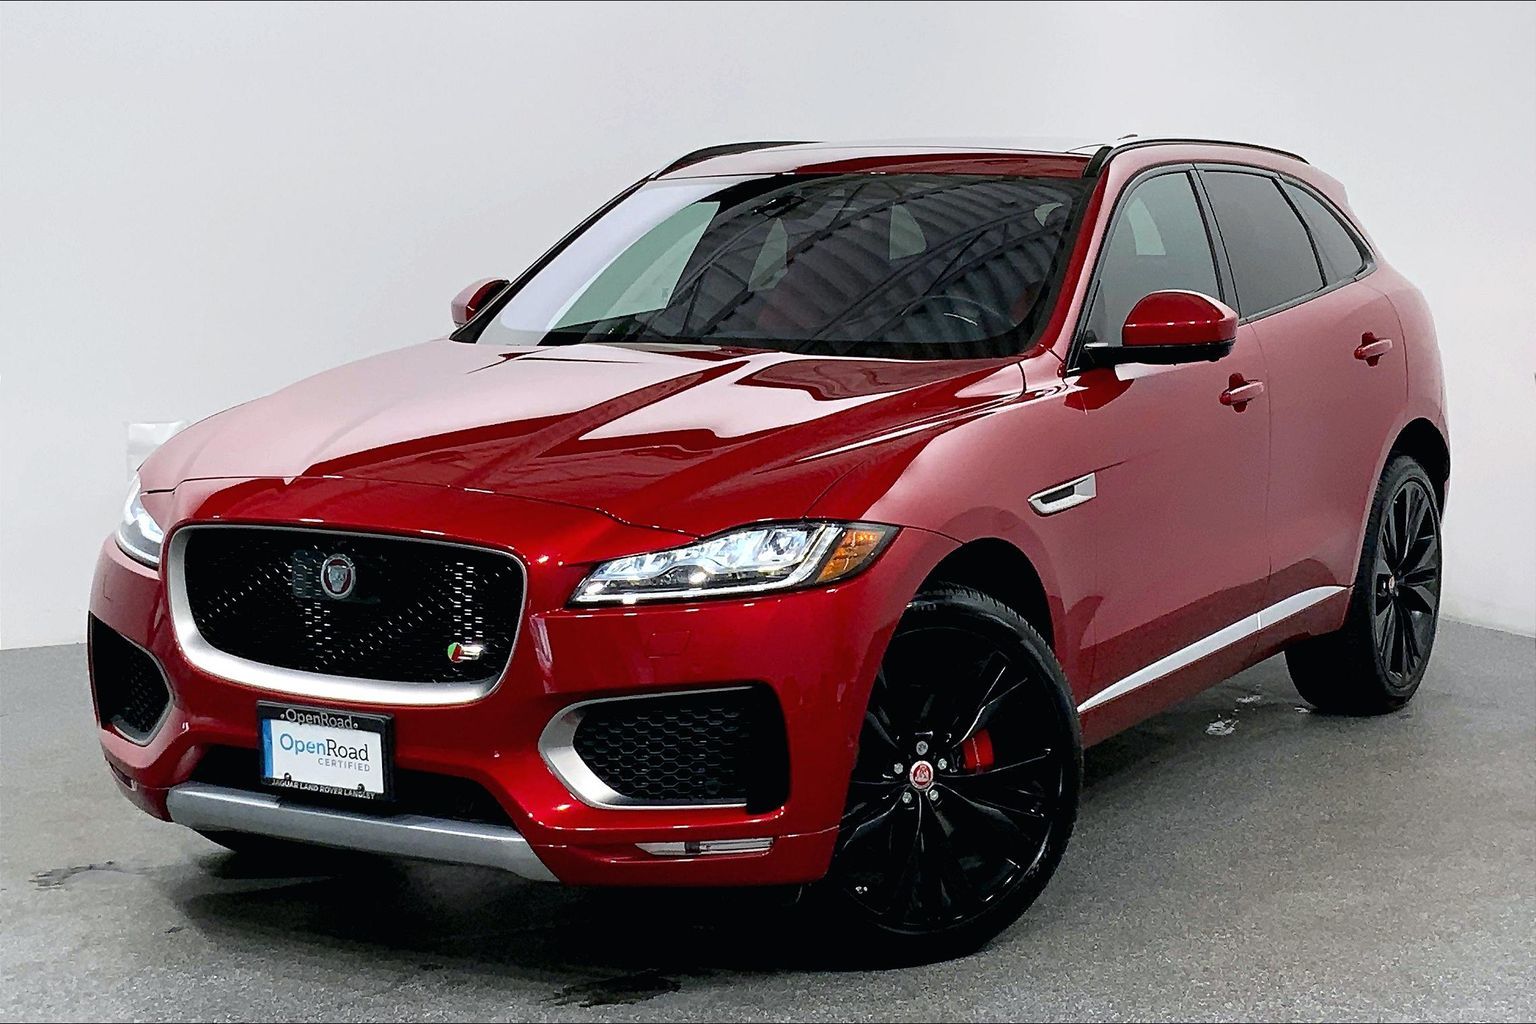 Certified Pre-Owned 2020 Jaguar F-PACE 25t Premium Sport Utility in Willow  Grove #P6365